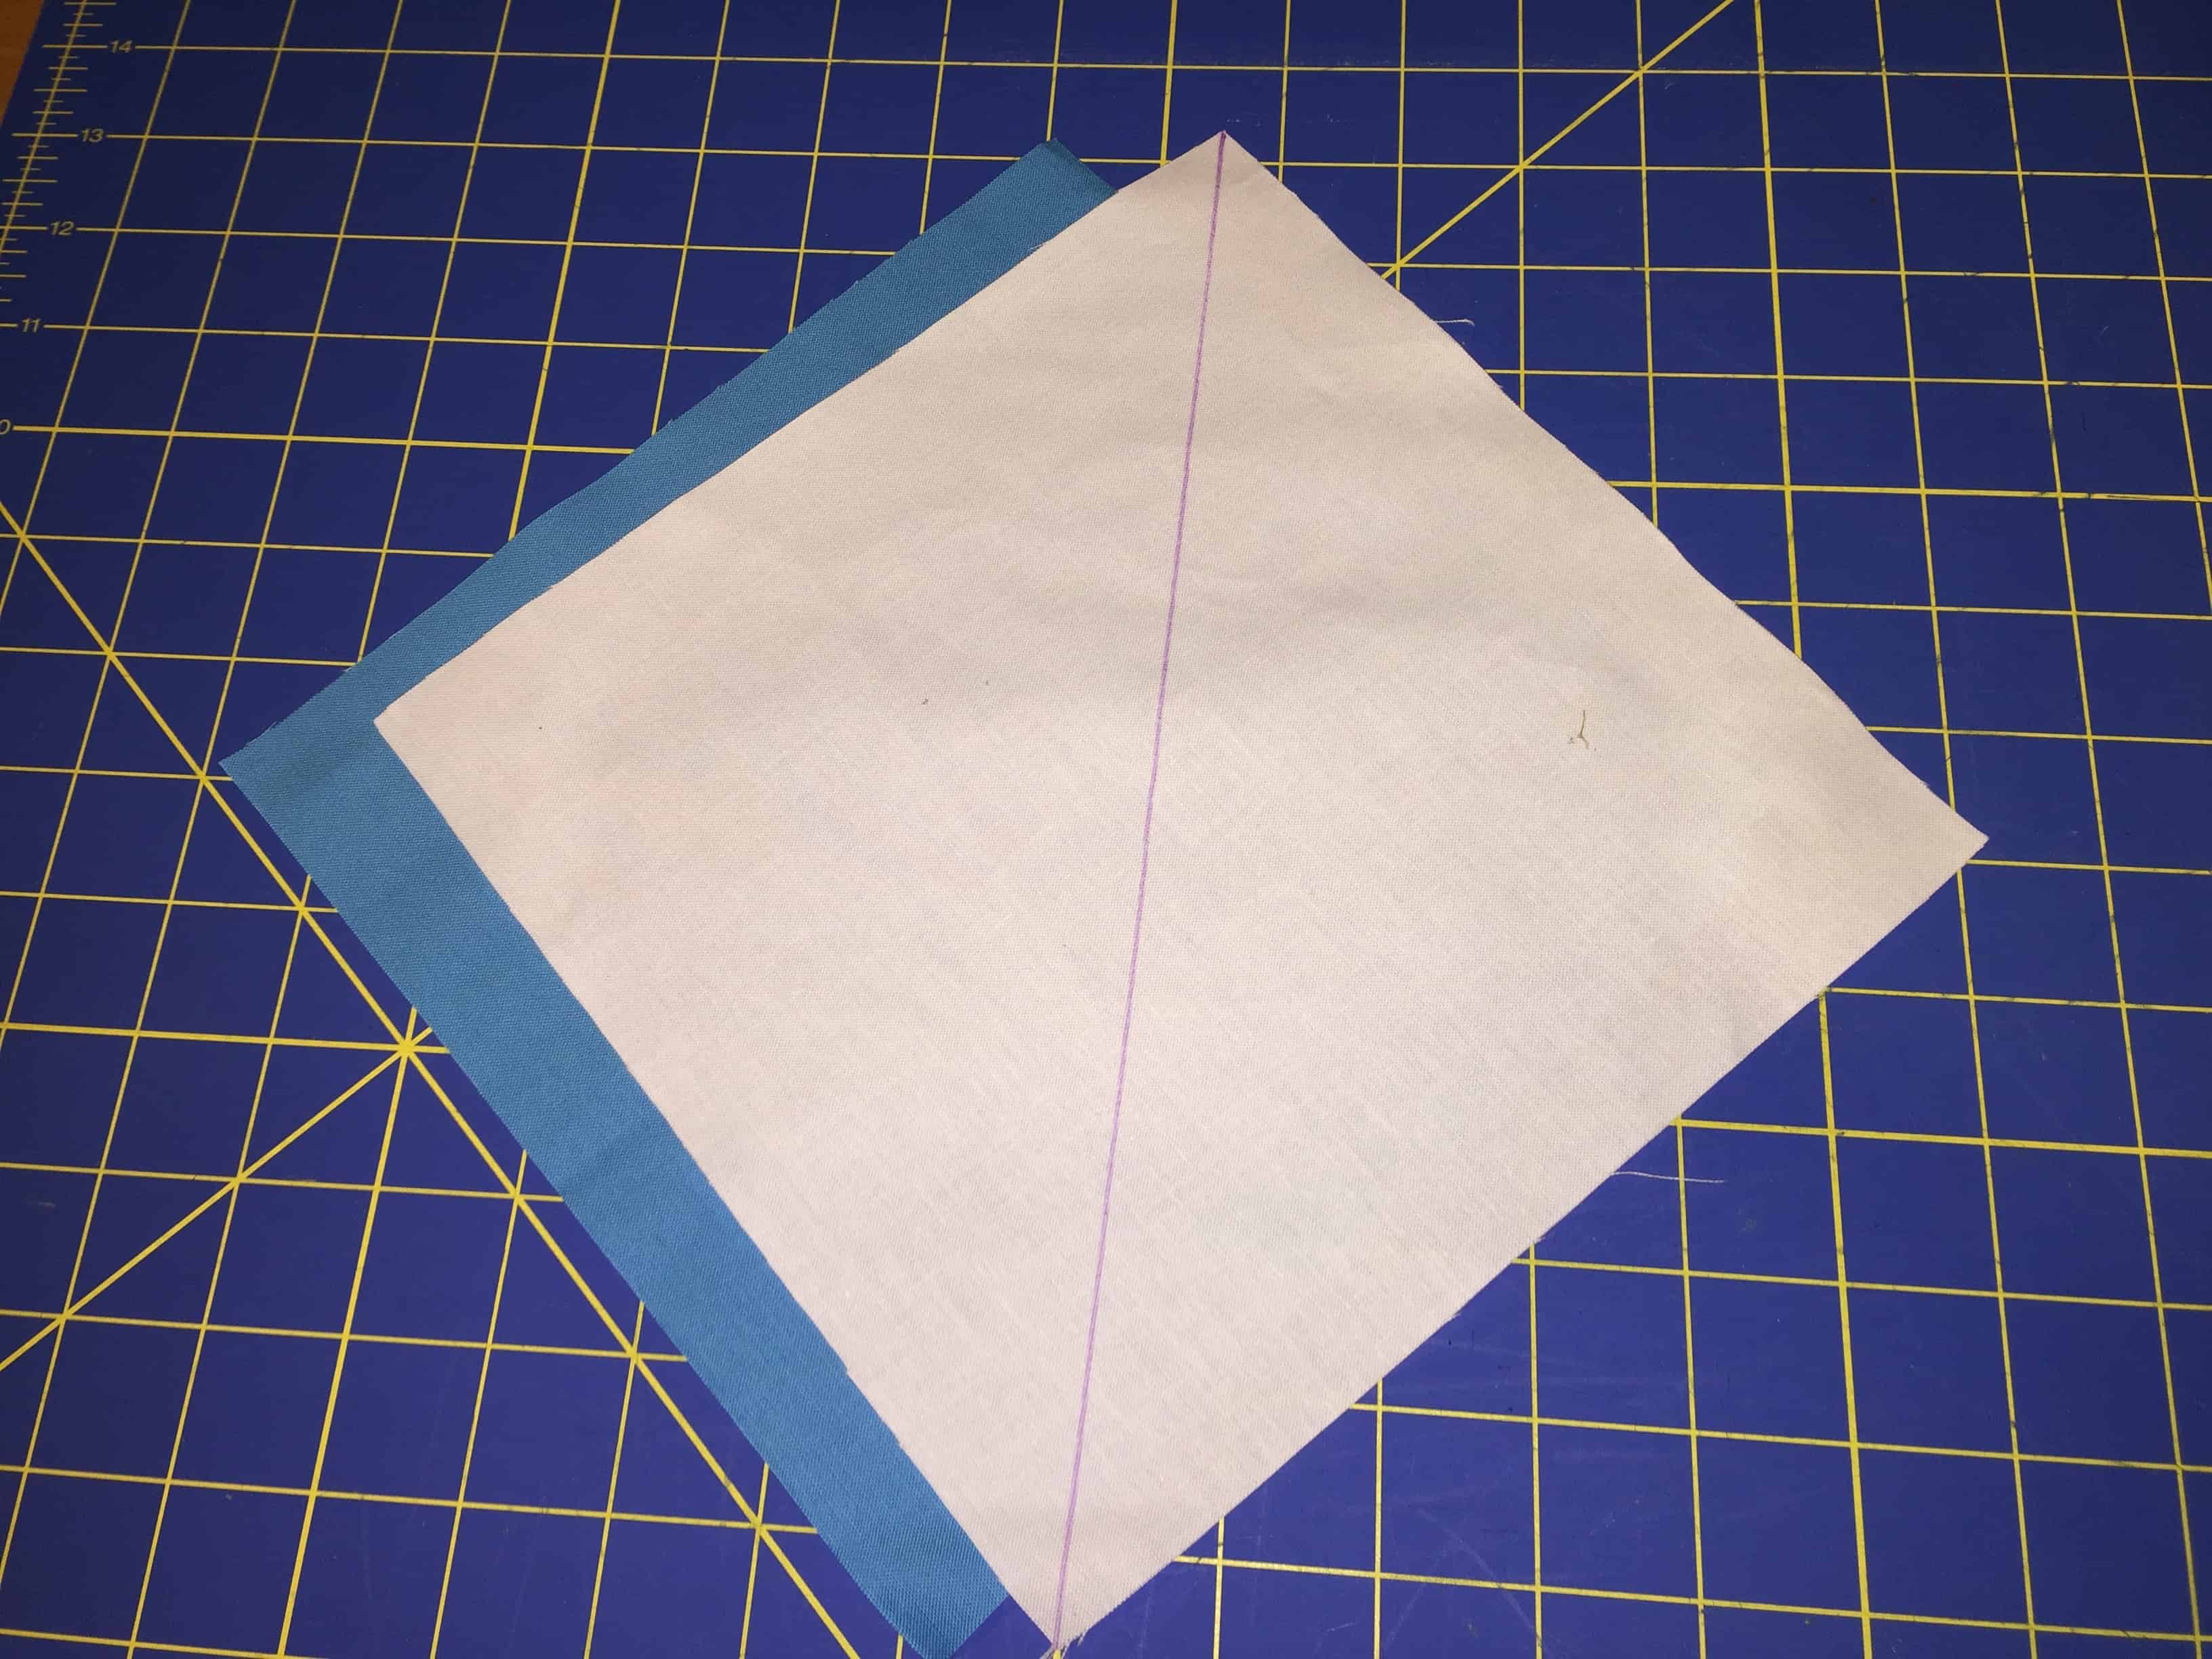 Create a half square triangle (HST) from two 8.5" squarea